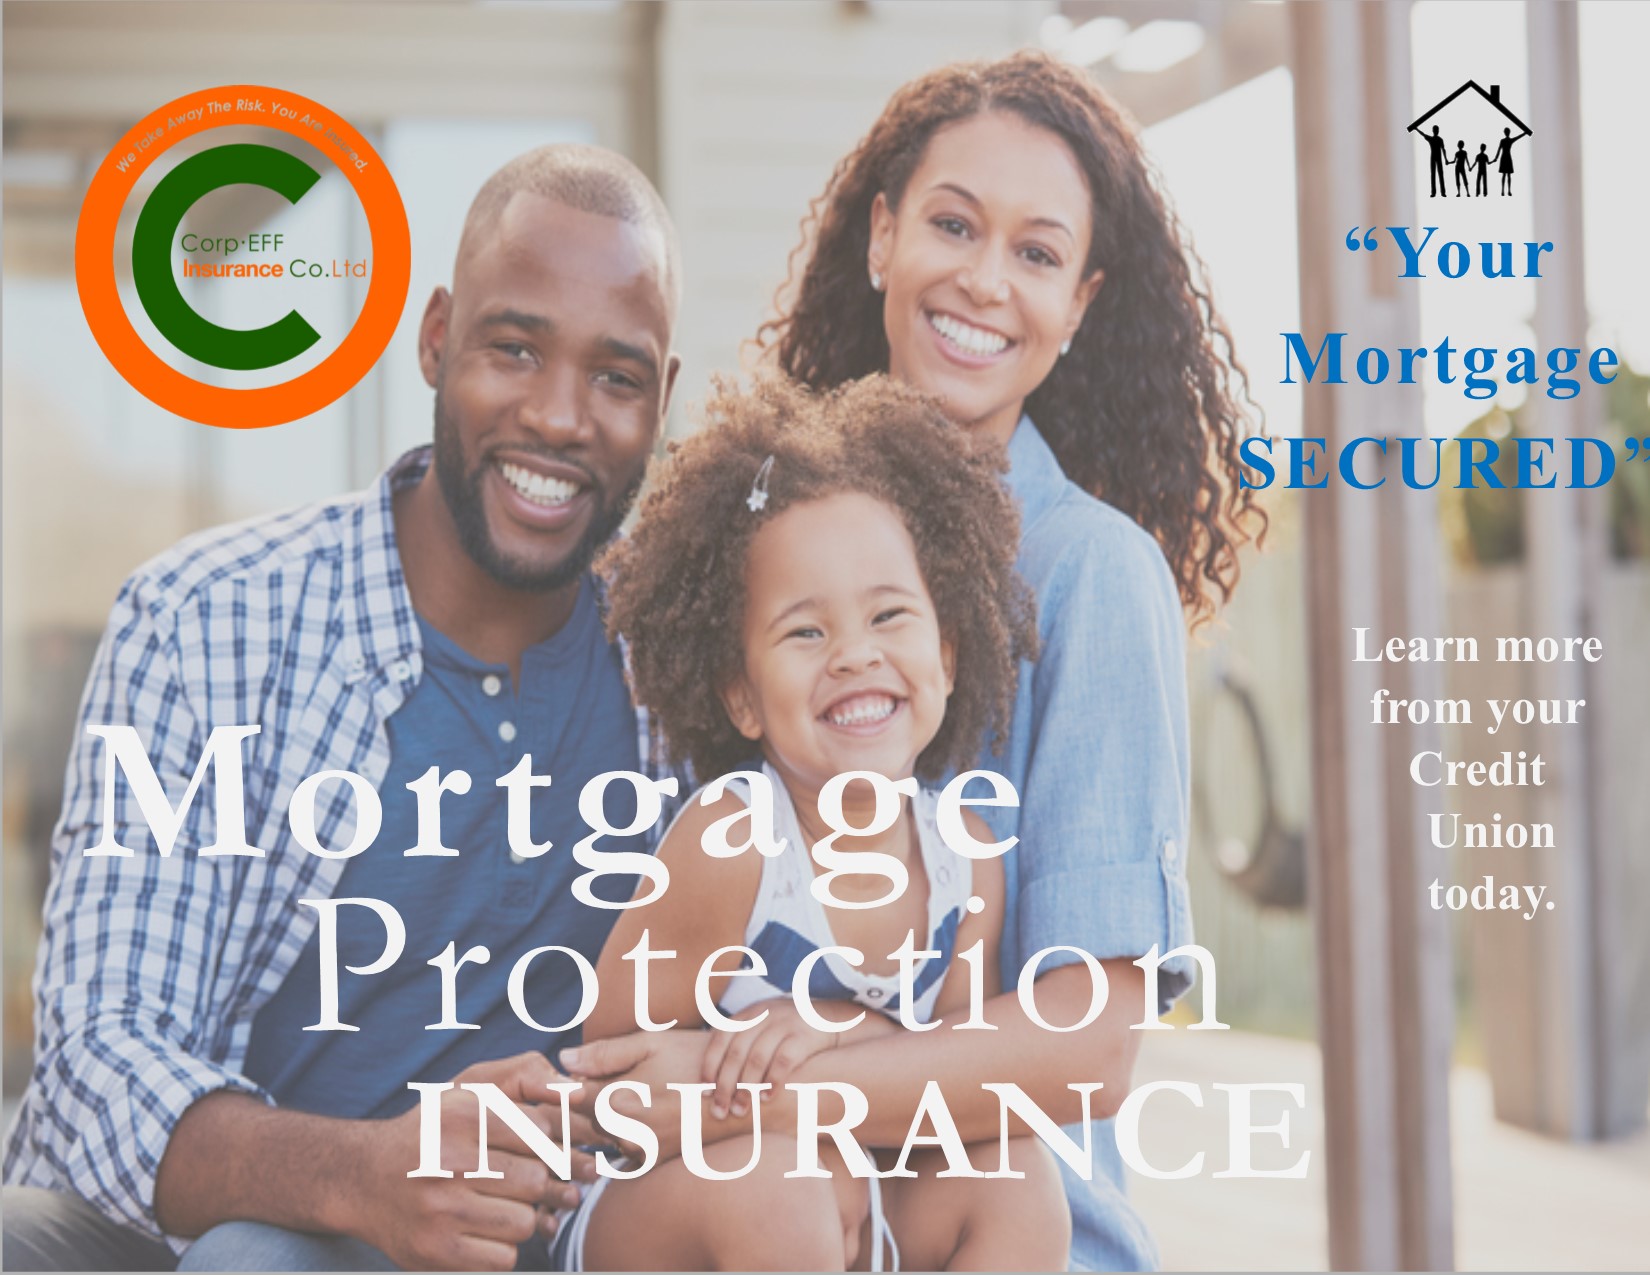 Mortgage Protection Insurance CORPEEF Insurance Company Ltd Dominica